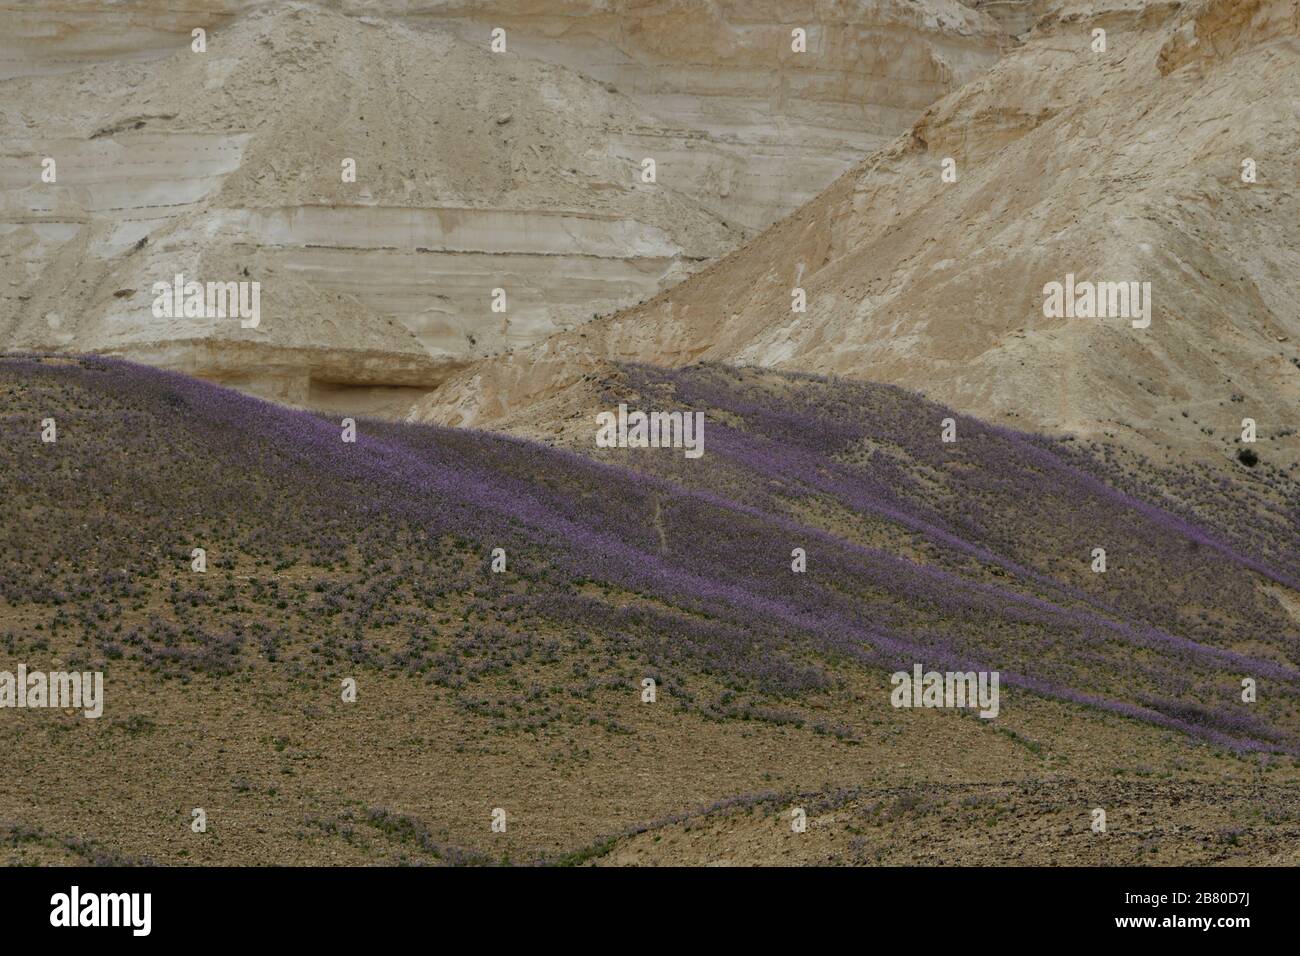 After a rare rainy season in the Negev Desert, an abundance of wildflowers sprout out and bloom. Photographed on the plain of Avdat, in the negev dese Stock Photo